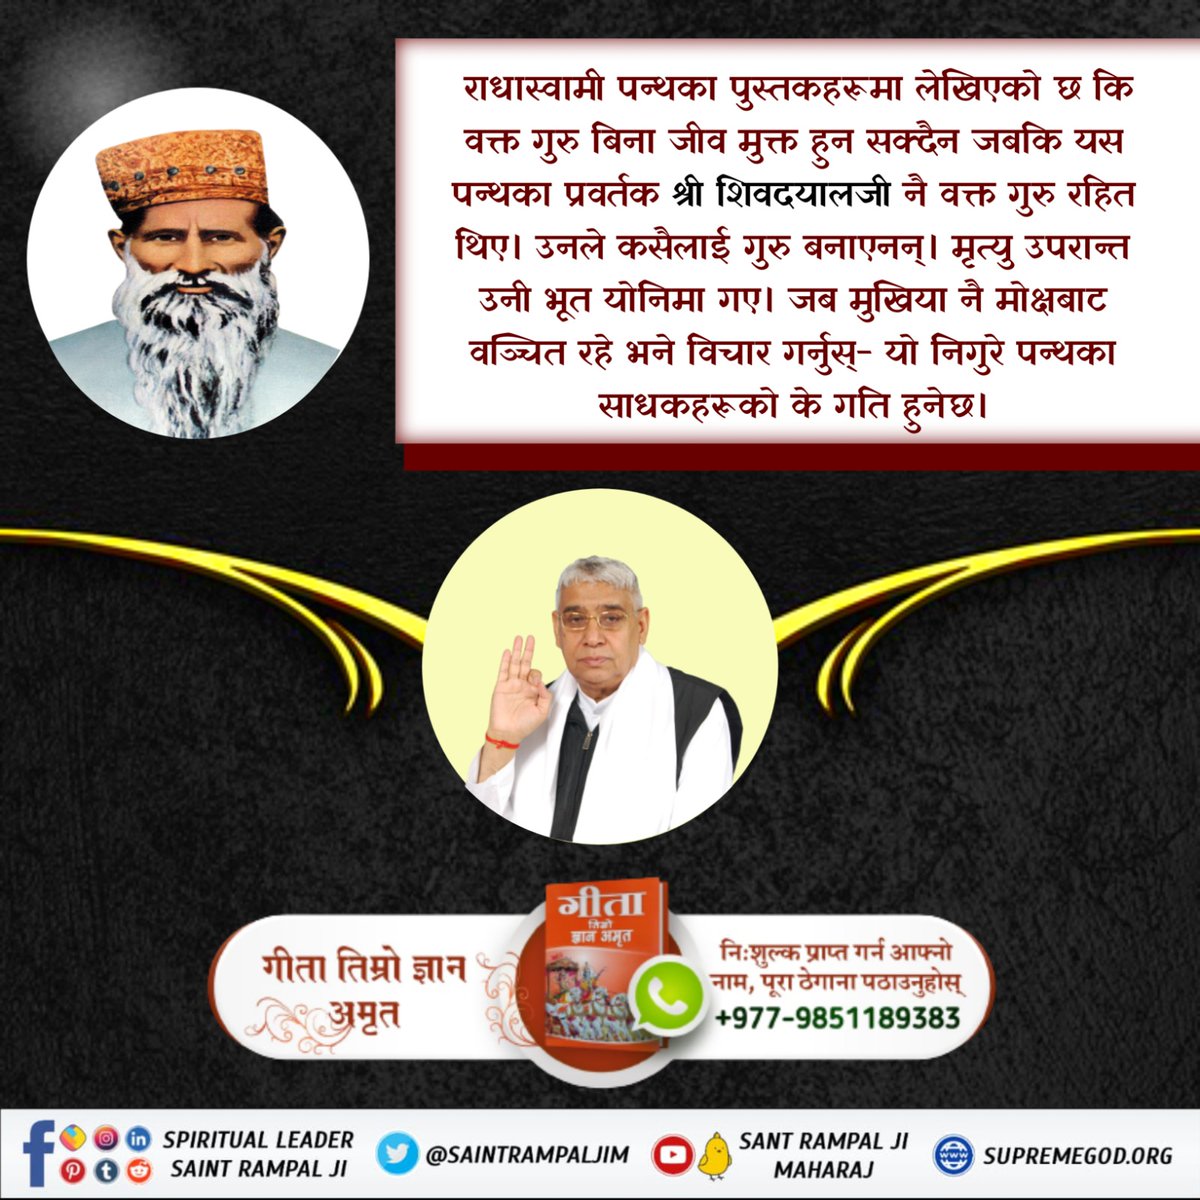 #राधास्वामी_पन्थको_सत्यता
 Radha Soami is a spiritual tradition founded by Shiv Dayal Singh in 1861. The tradition's teachings are based on the concept of 'formless light.'